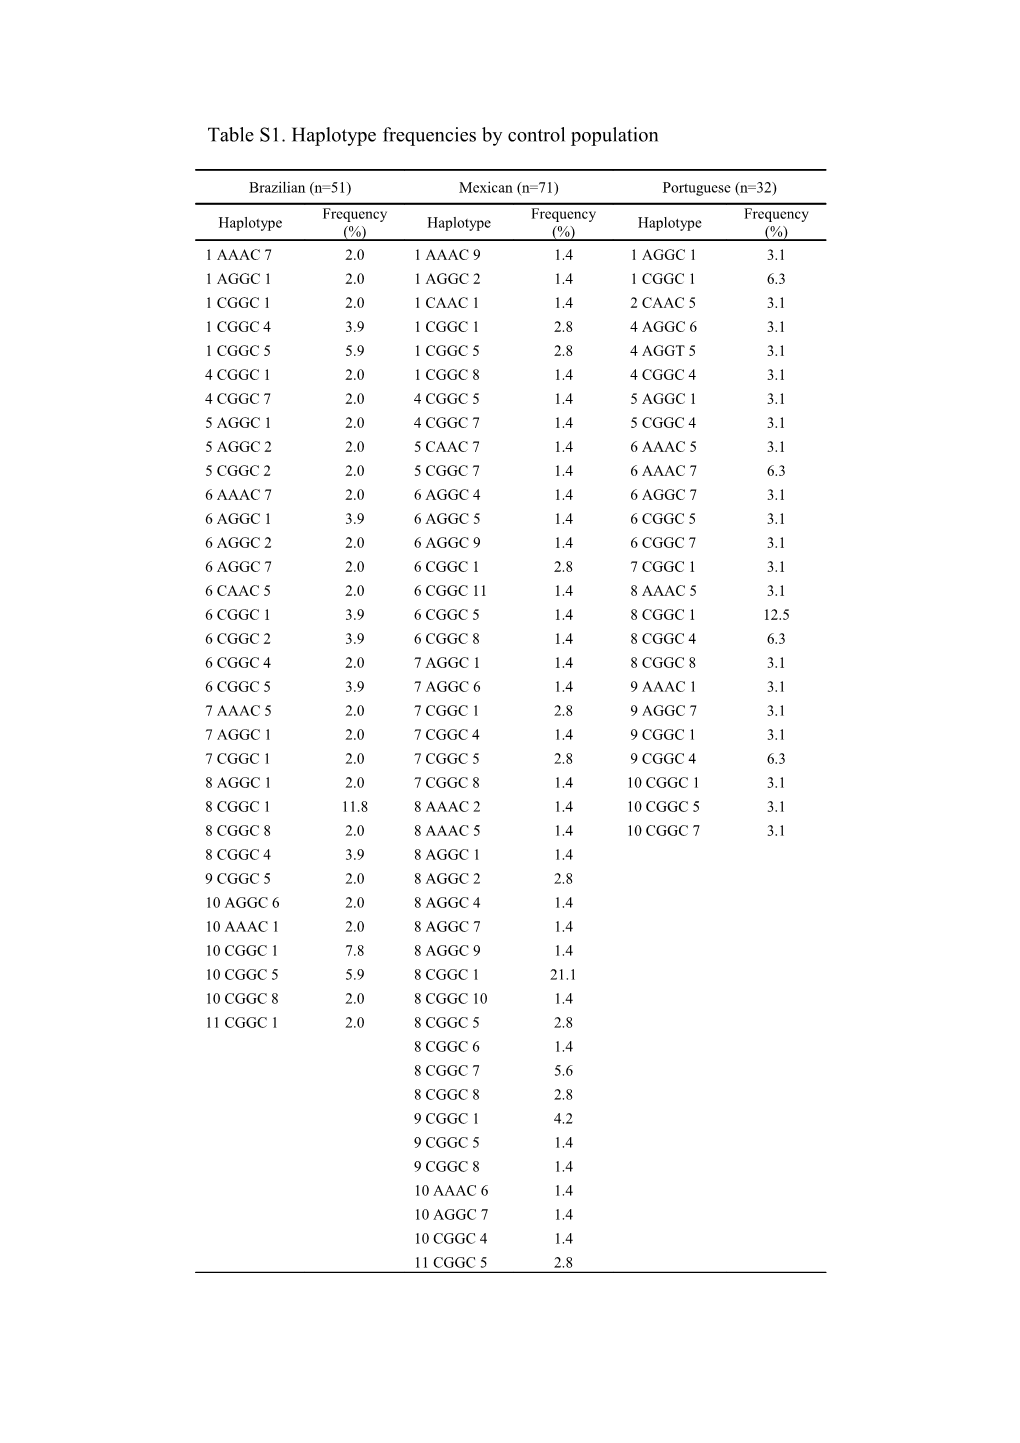 Table S1. Haplotype Frequencies by Control Population